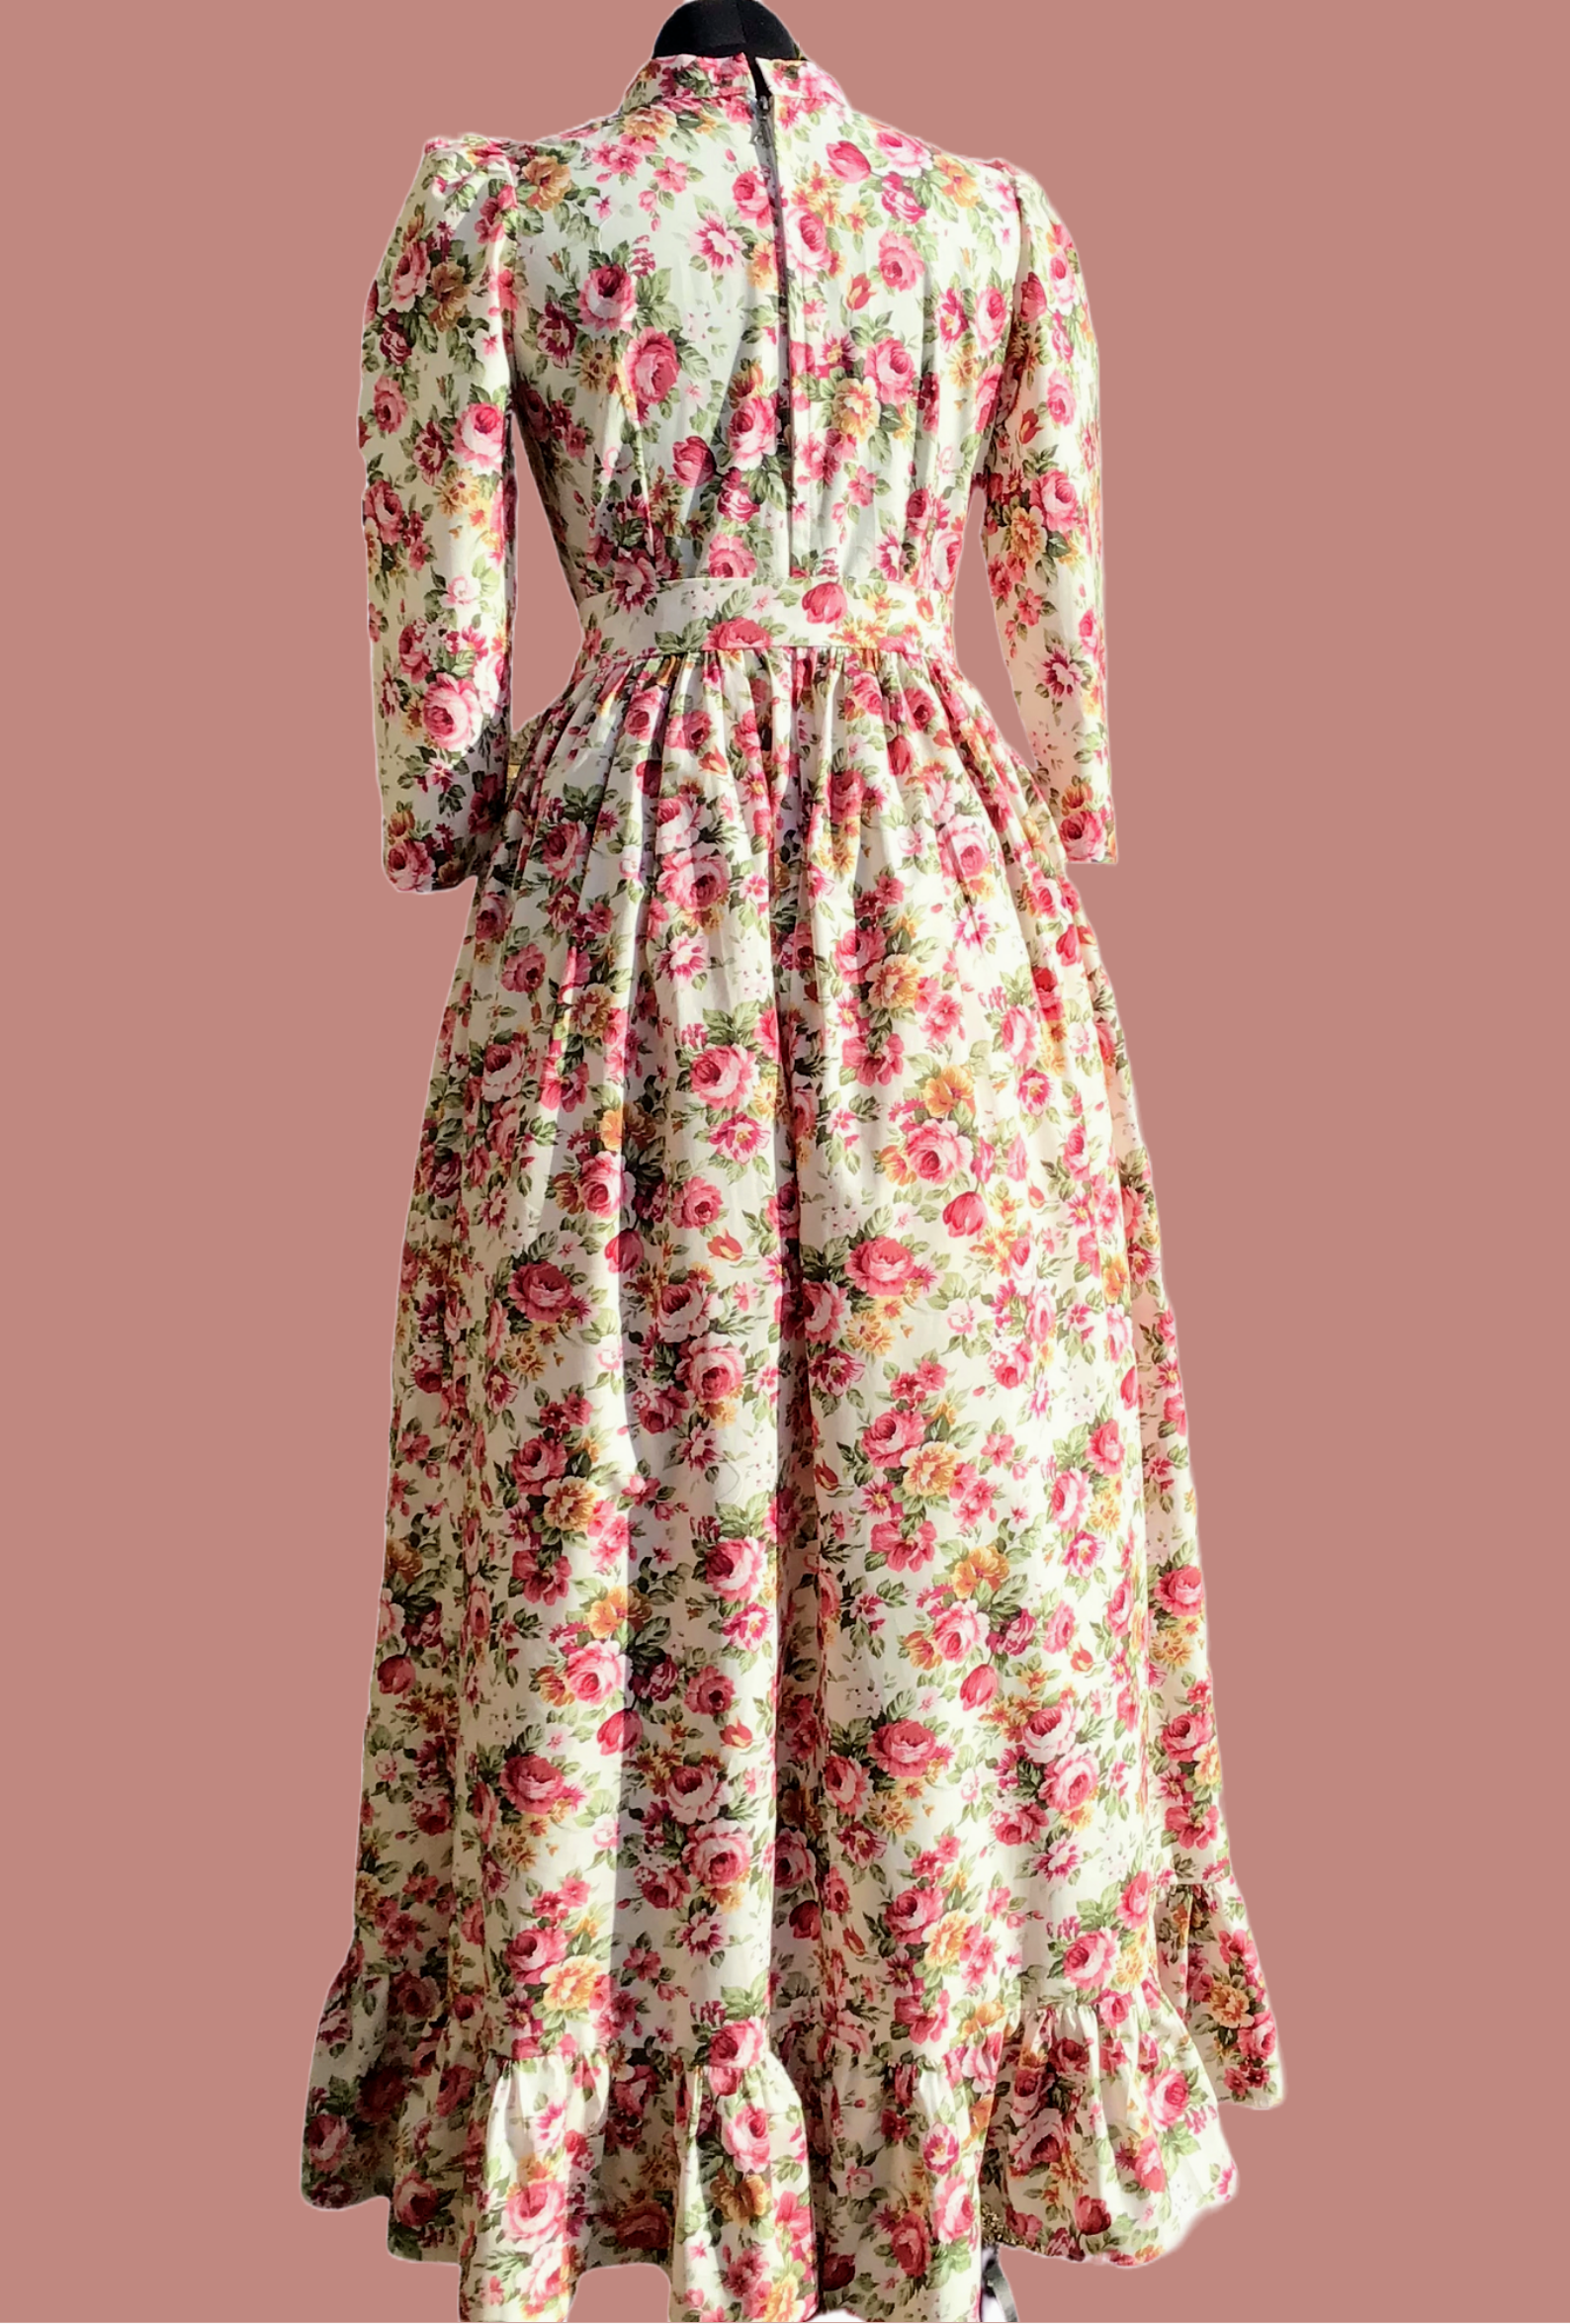 This Emmeline maxi dress has a timeless silhouette, with a vintage-style design taking its cues from Edwardian fashion